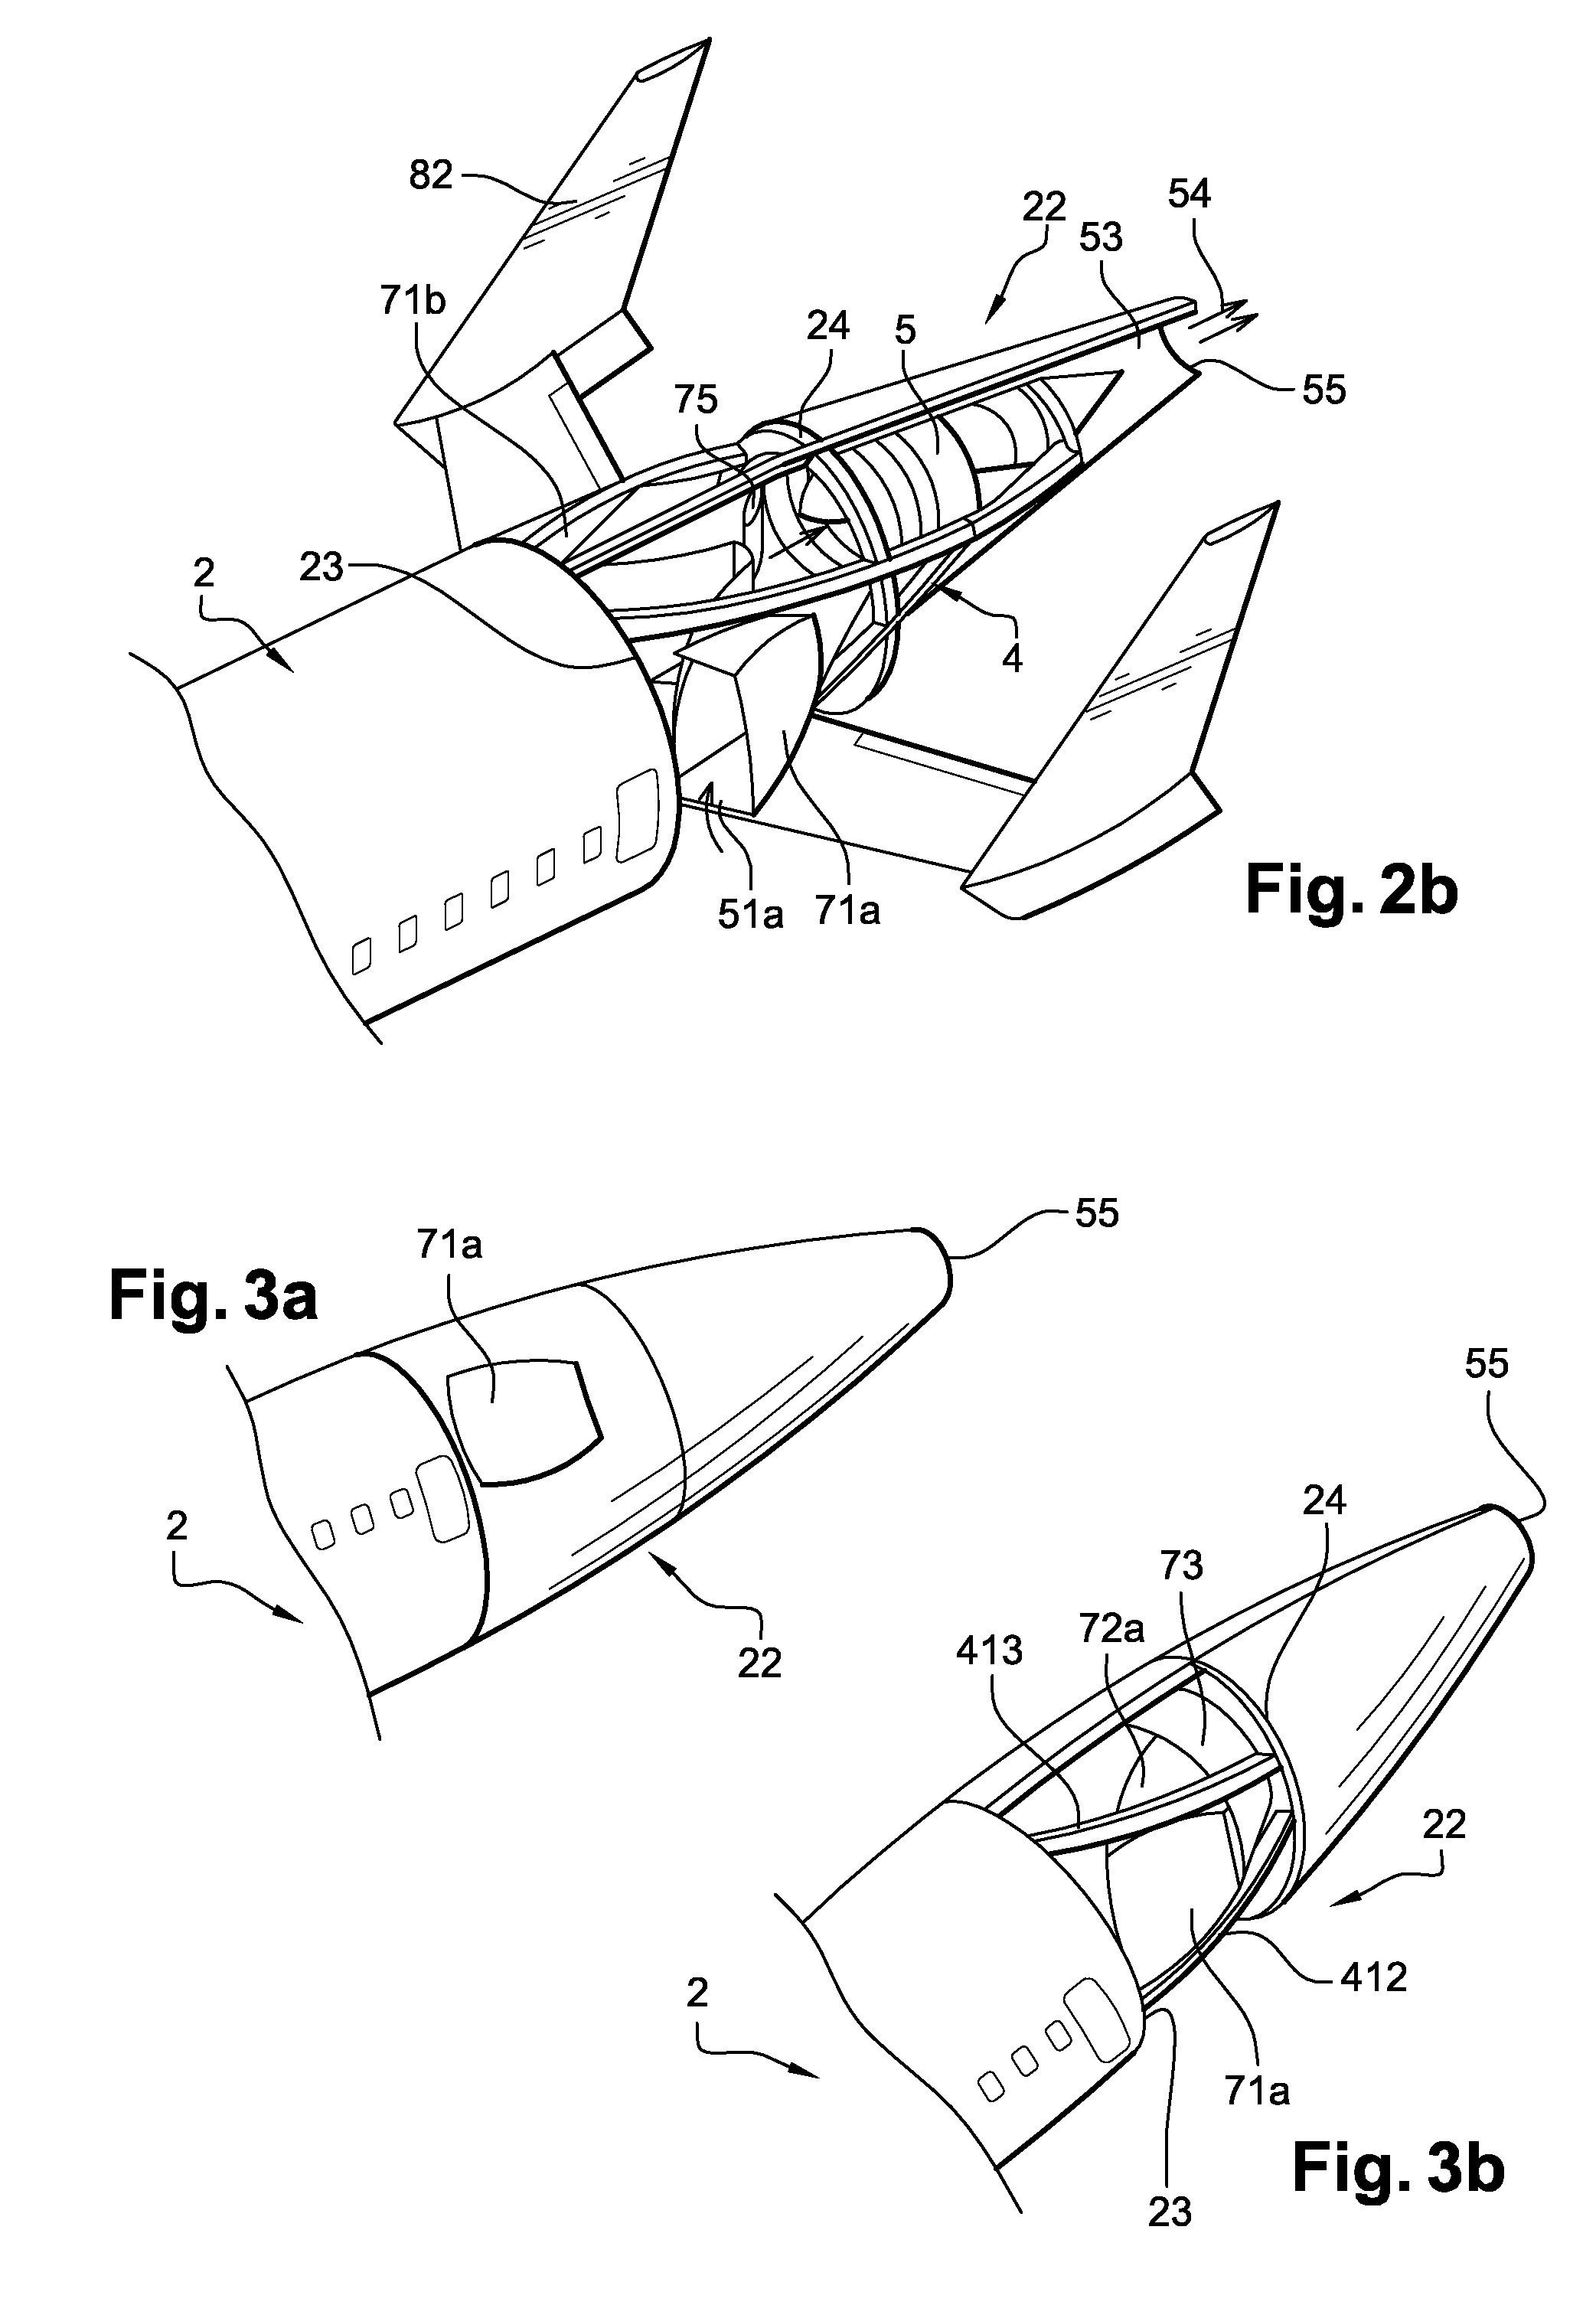 Rear propulsion system with lateral air inlets for an aircraft with such system